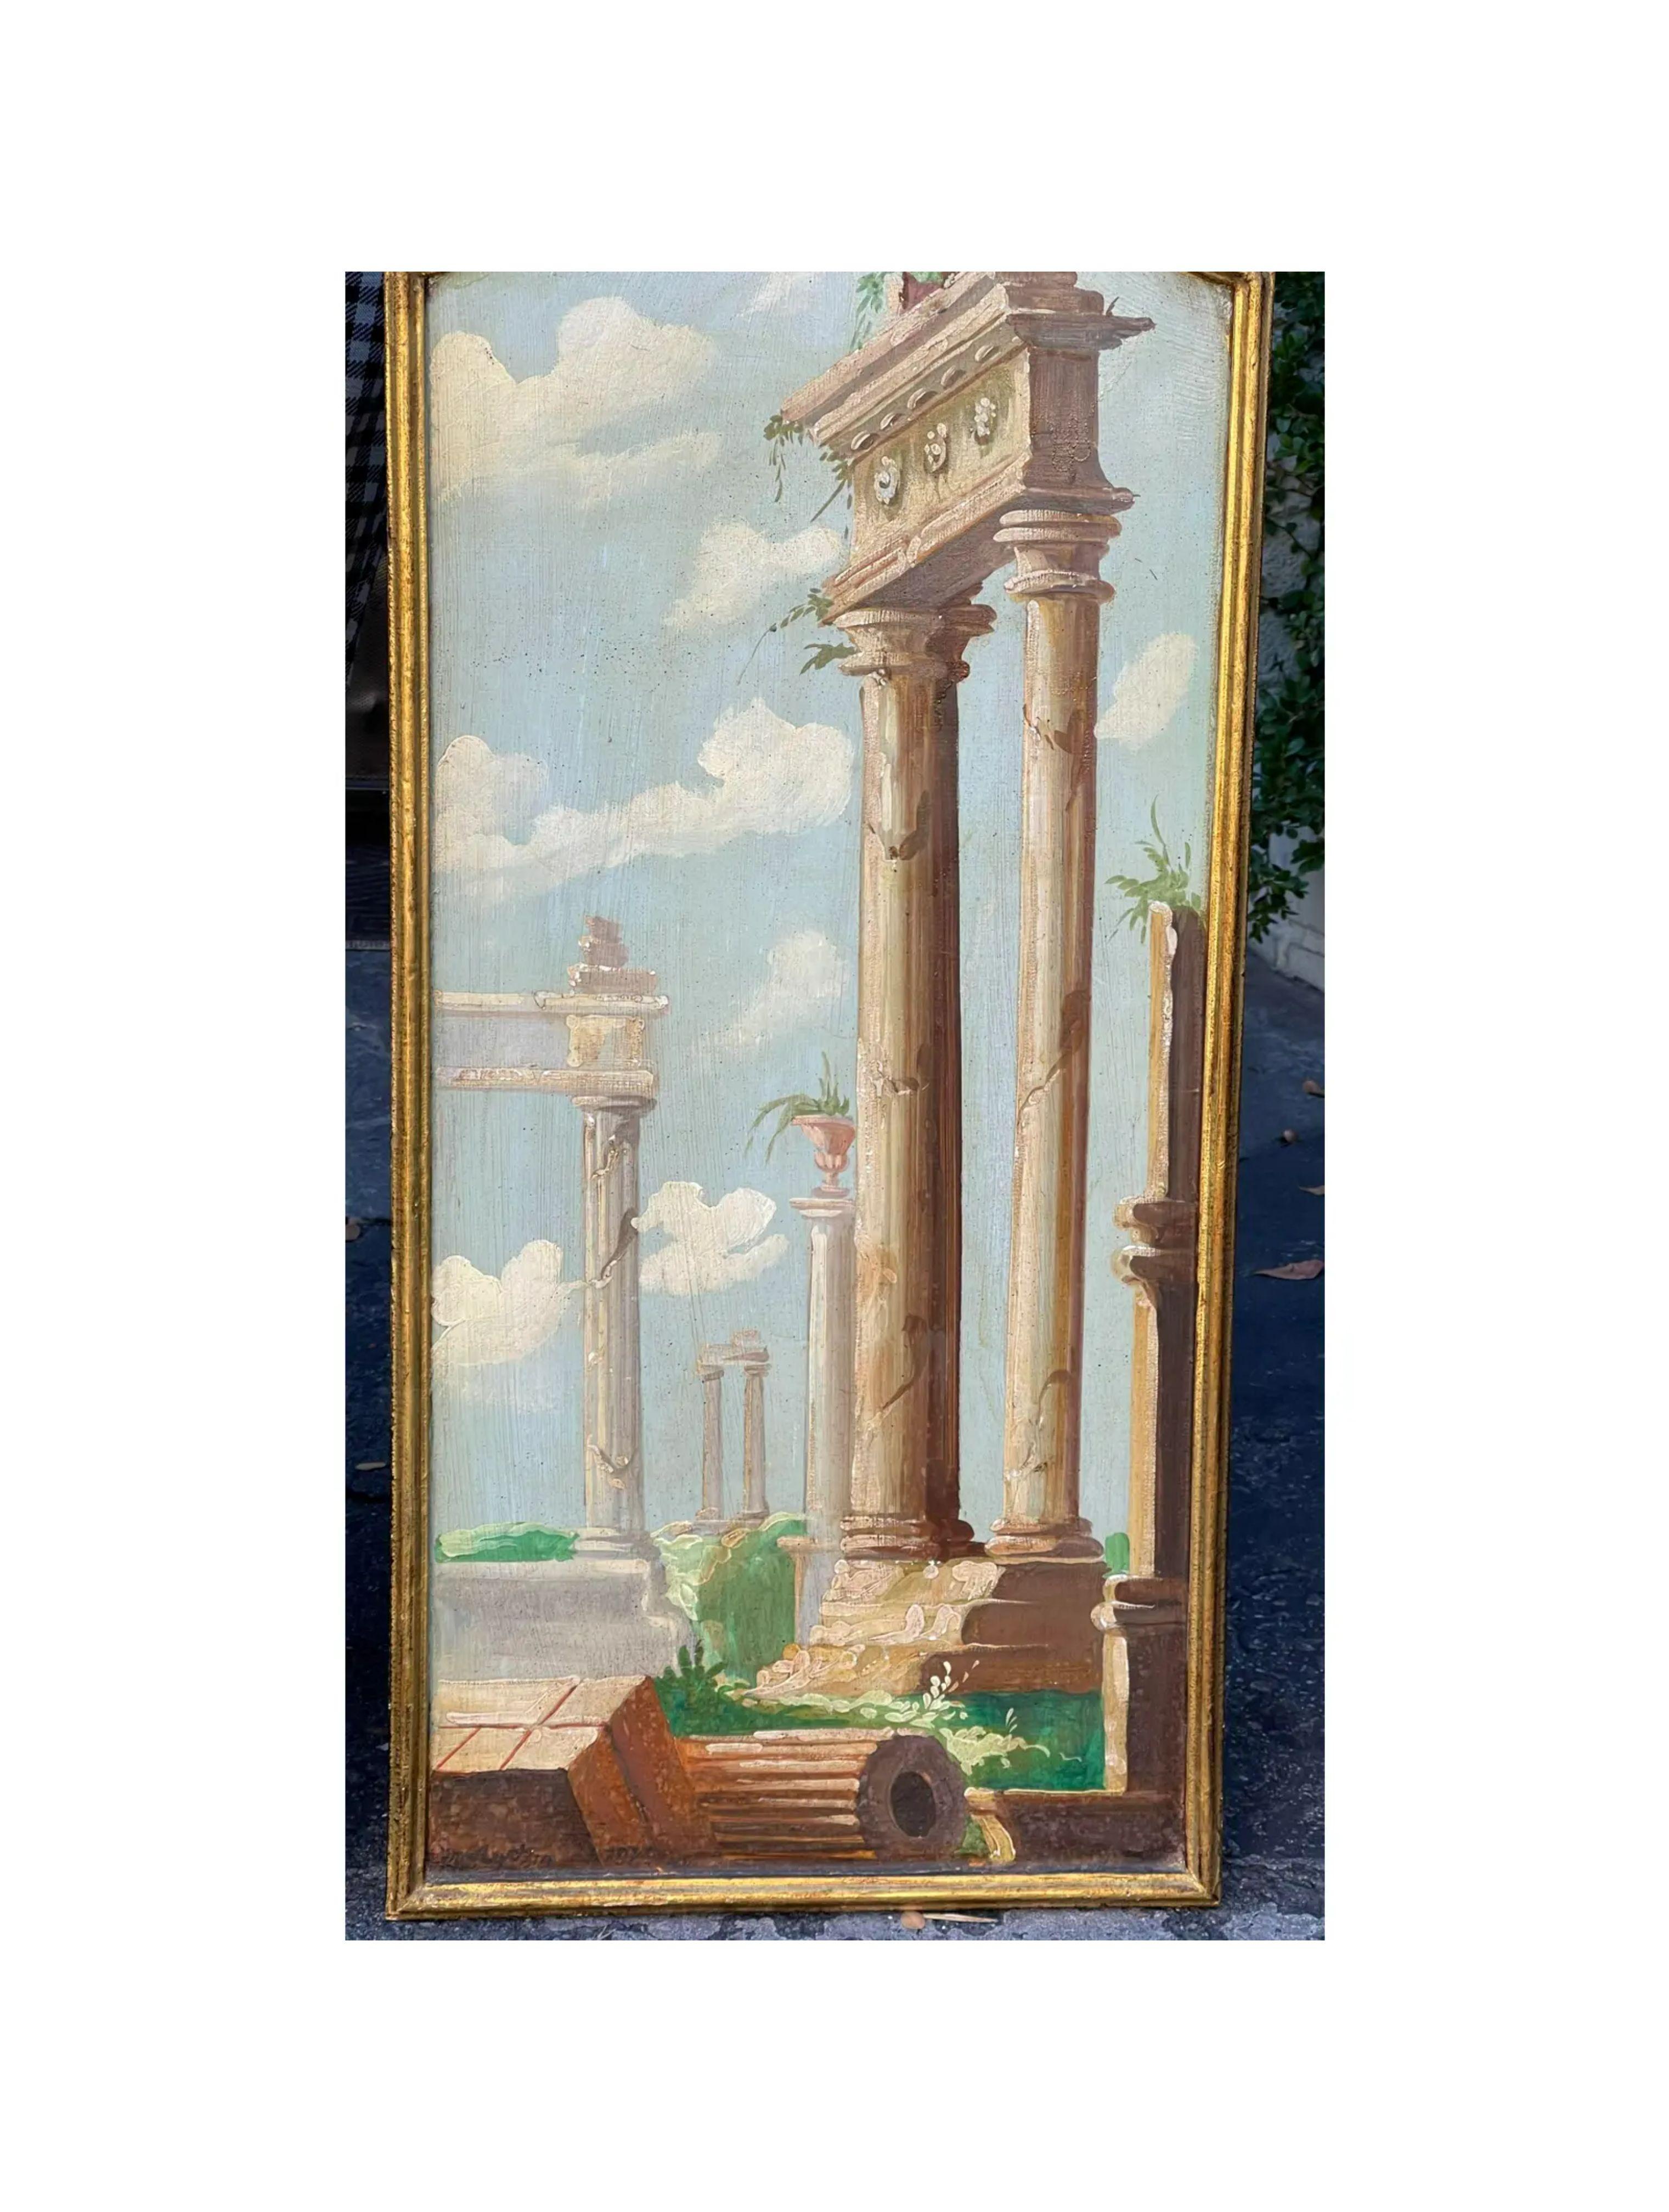 19th century Style Italian architectural landscape paintings - a pair.
Provenance: From The Plaza Hotel in New York.

Additional information: 
Materials: Giltwood, oil paint.
Color: Blue
Period: Early 20th century
Art Subjects: